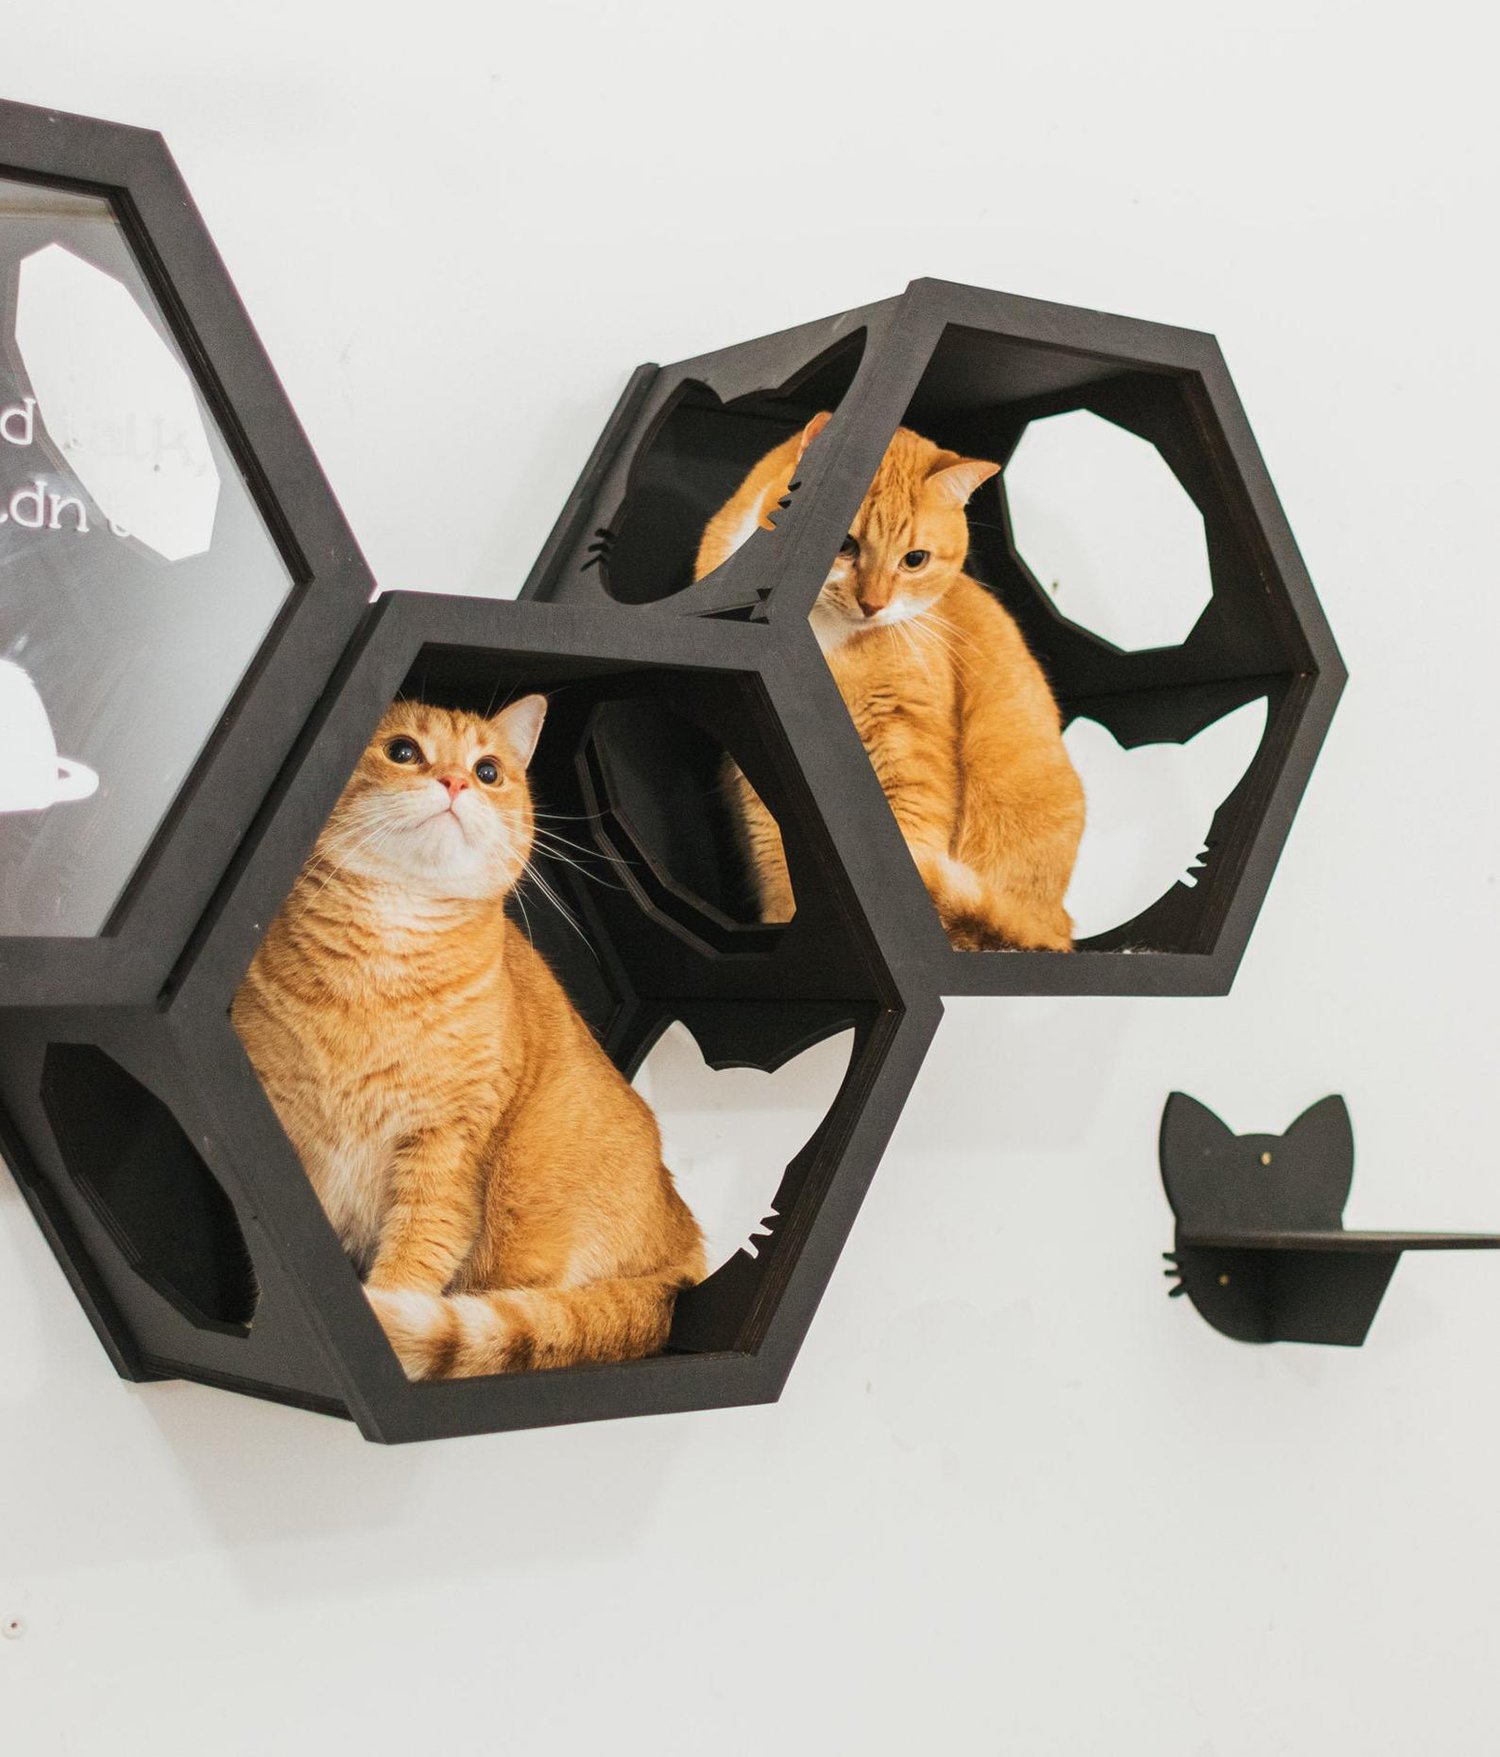 Modern hexagonal connecting cat climbing perches and steps